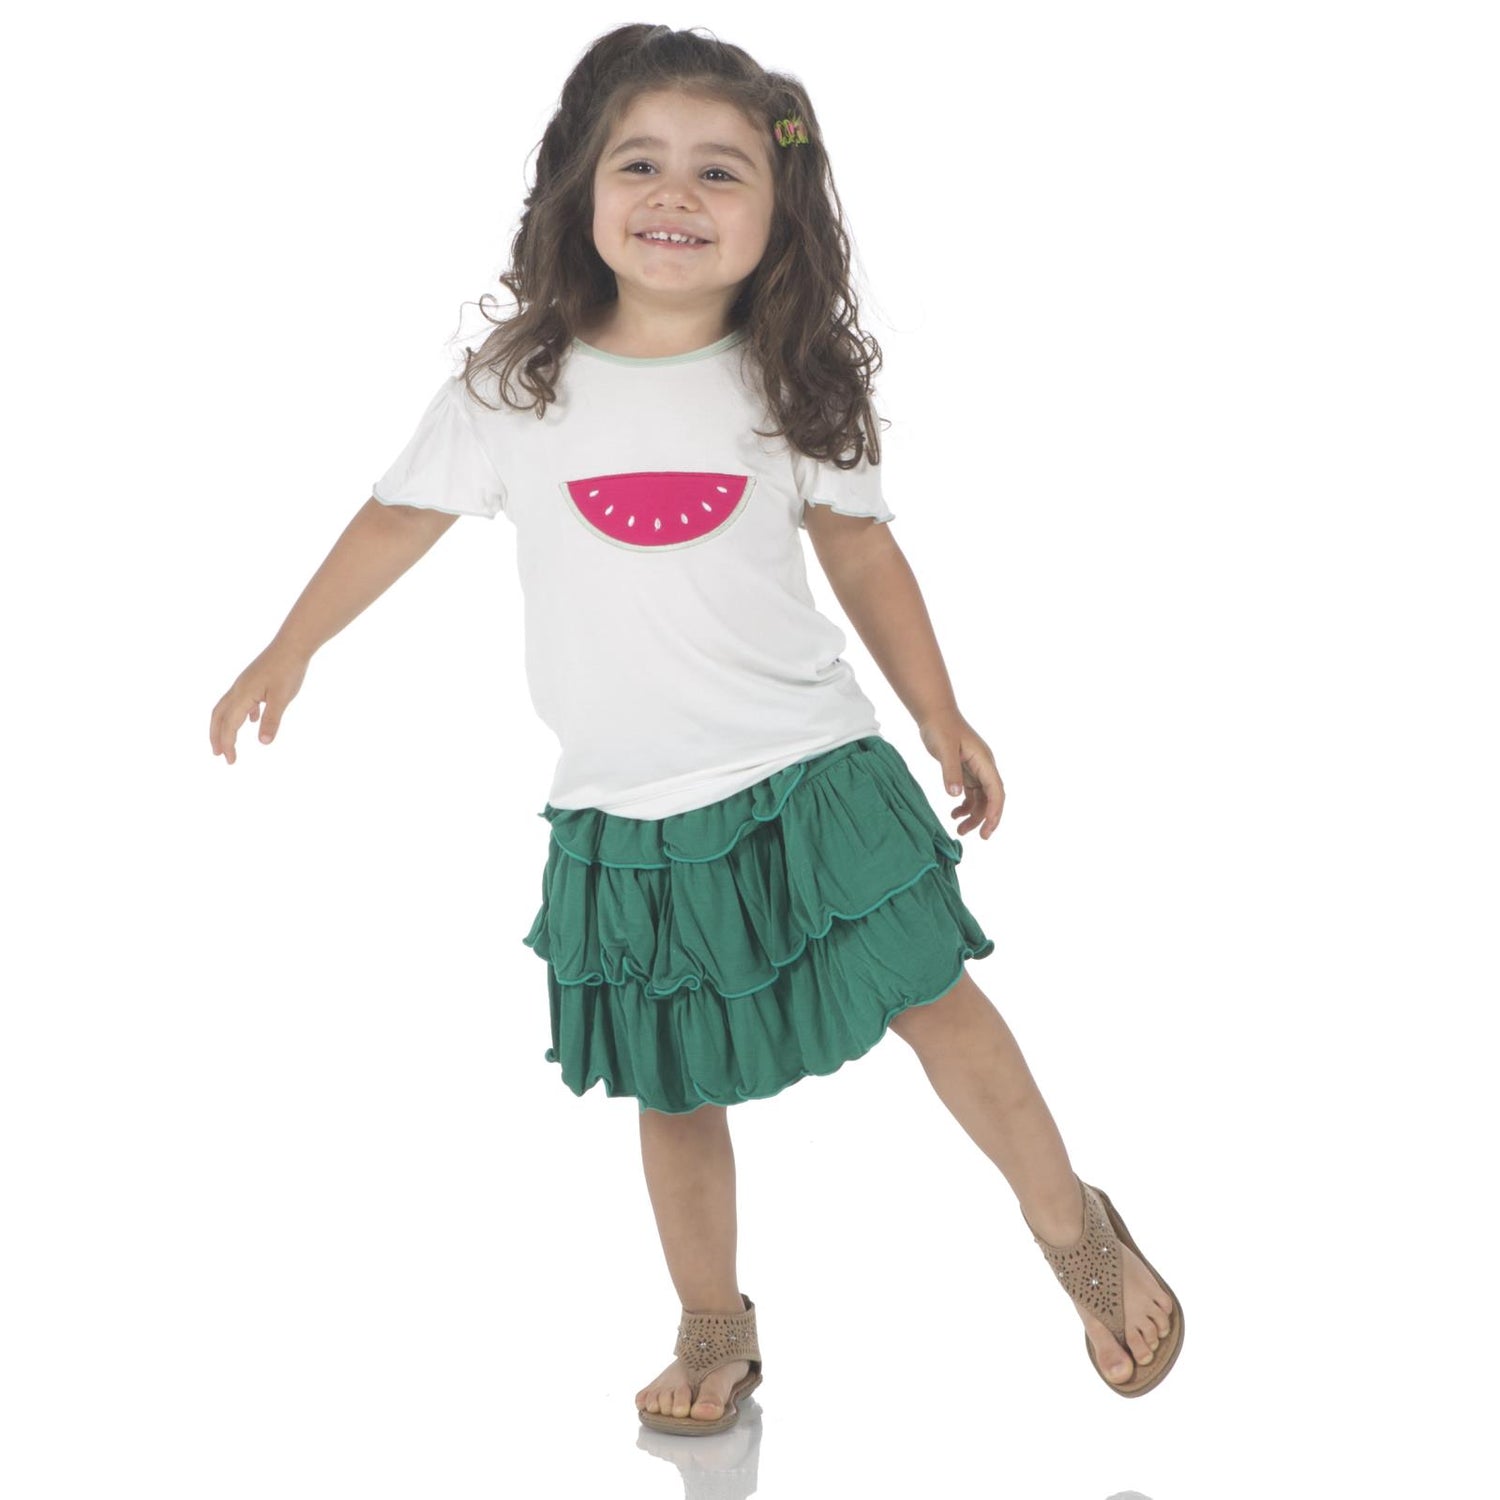 Flutter Sleeve Applique Tee in Natural Watermelon